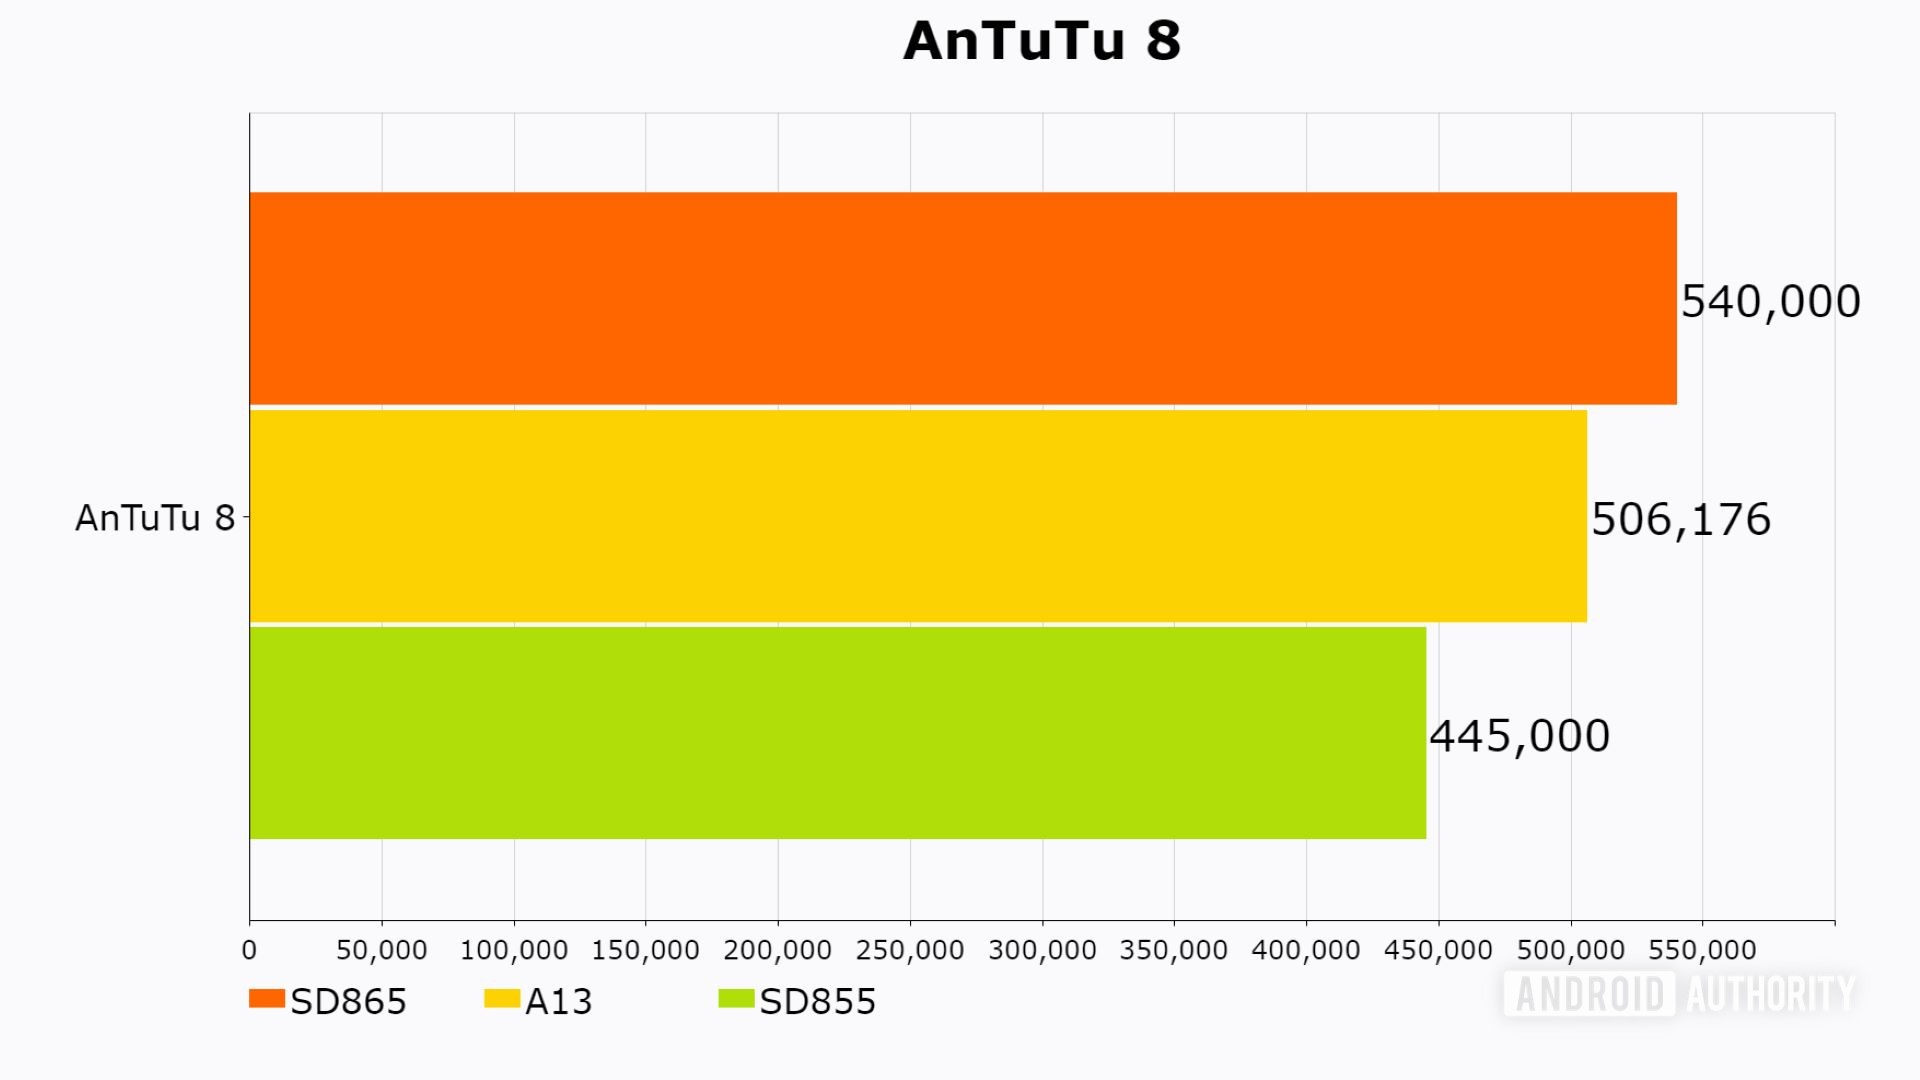 AnTuTu 8 results for Snapdragon 865, Apple A13, and Snapdragon 855